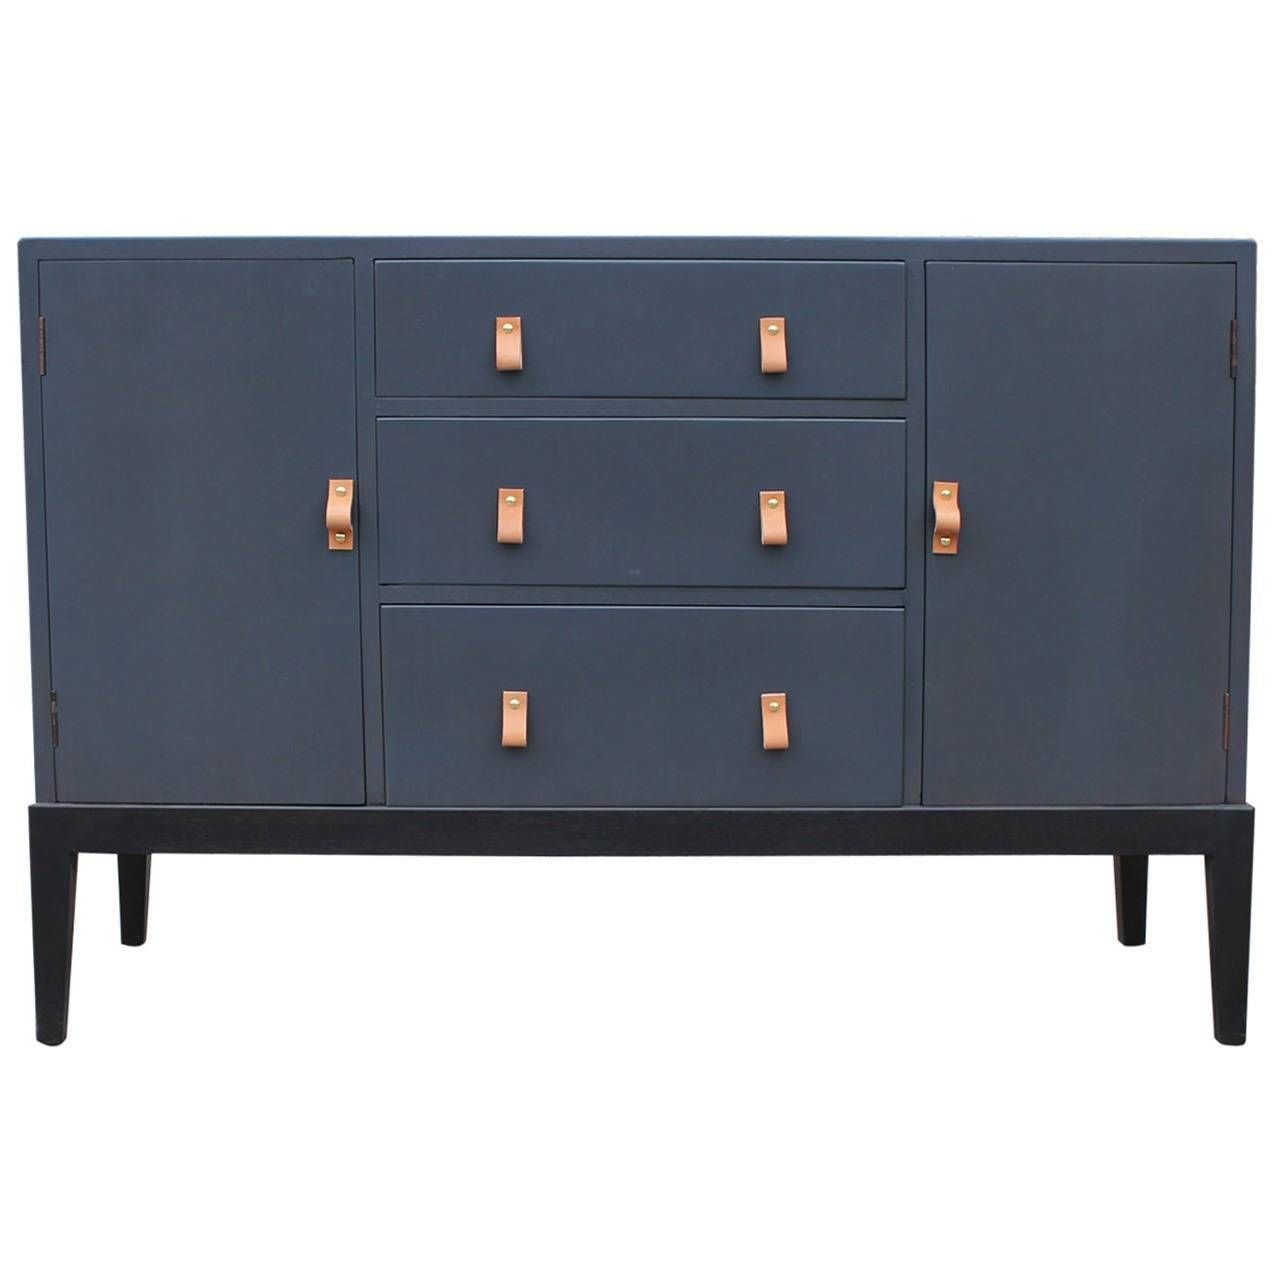 Superb Grey Sideboard Or Buffet With Leather Handles At 1stdibs Regarding Grey Sideboard (View 14 of 20)